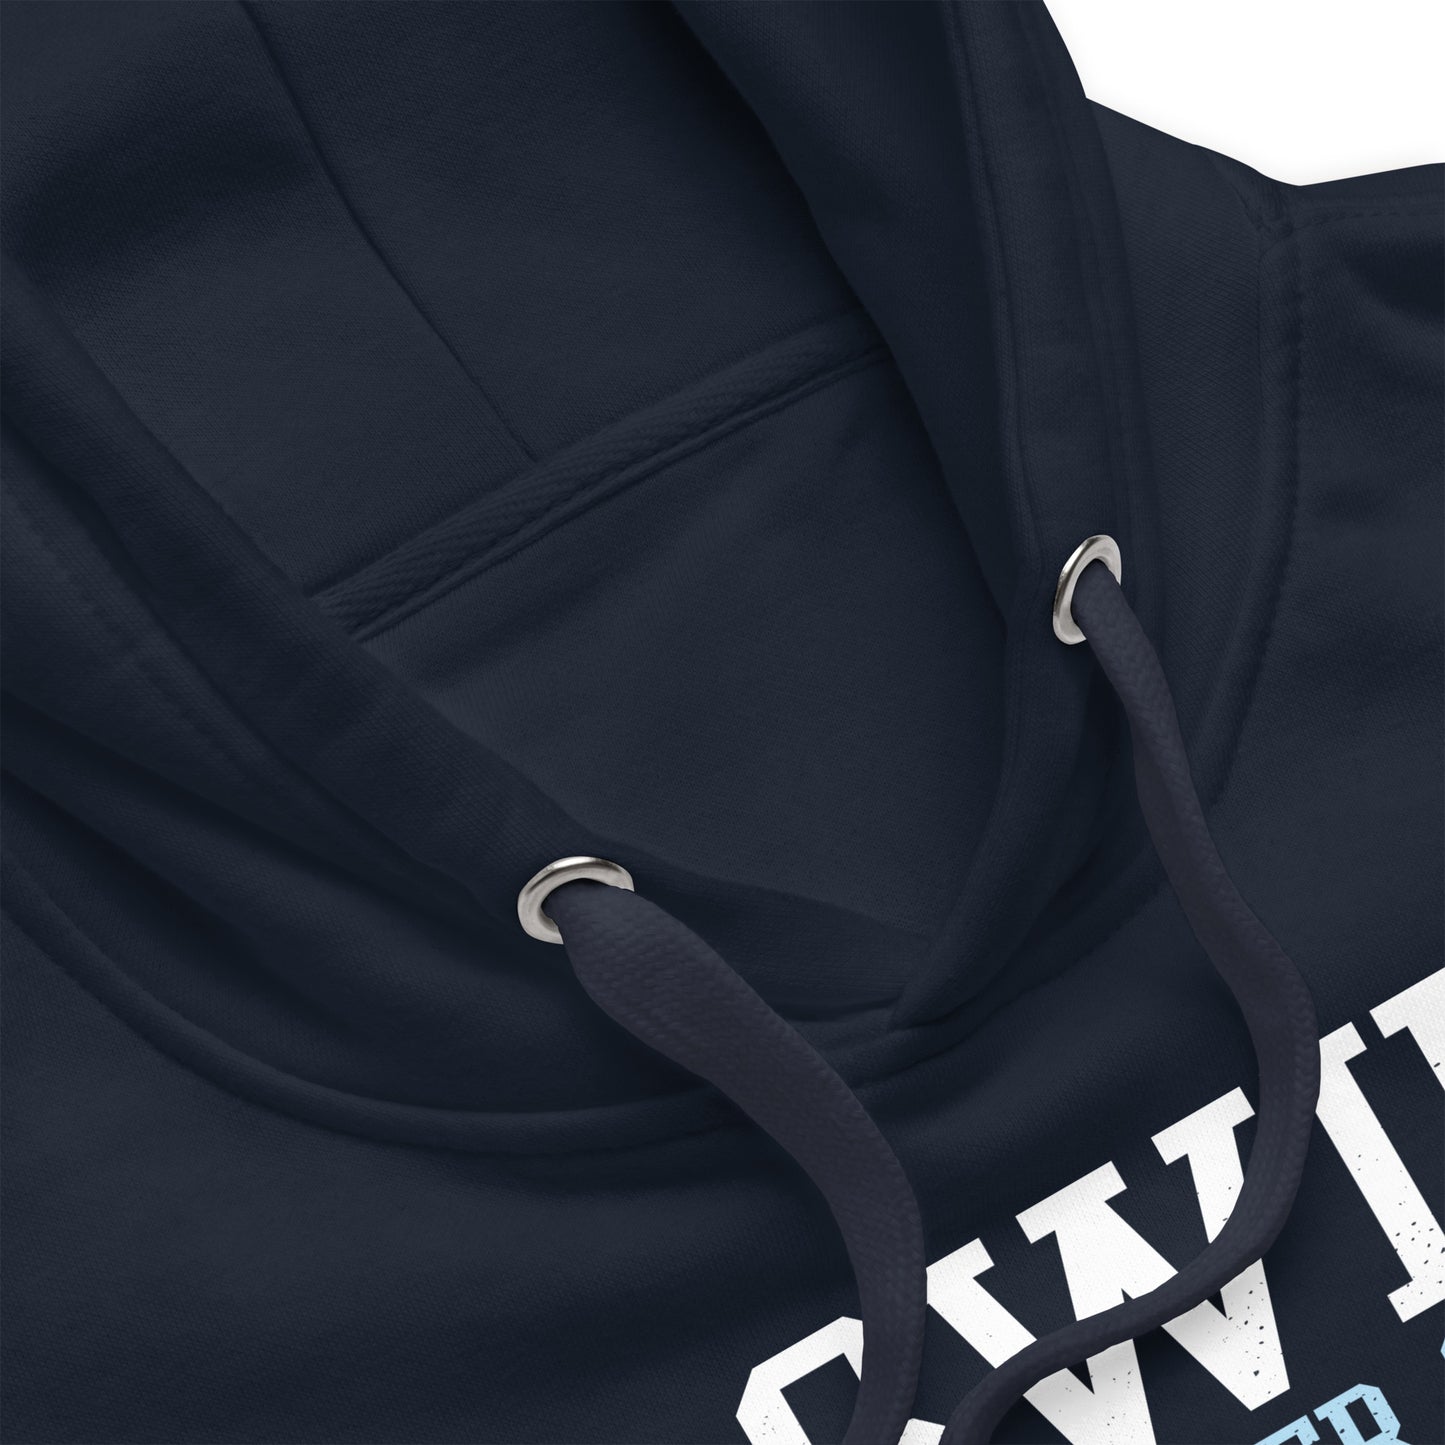 Swimmer Premium Hoodie I Swim If You Ever See Me Running Funny